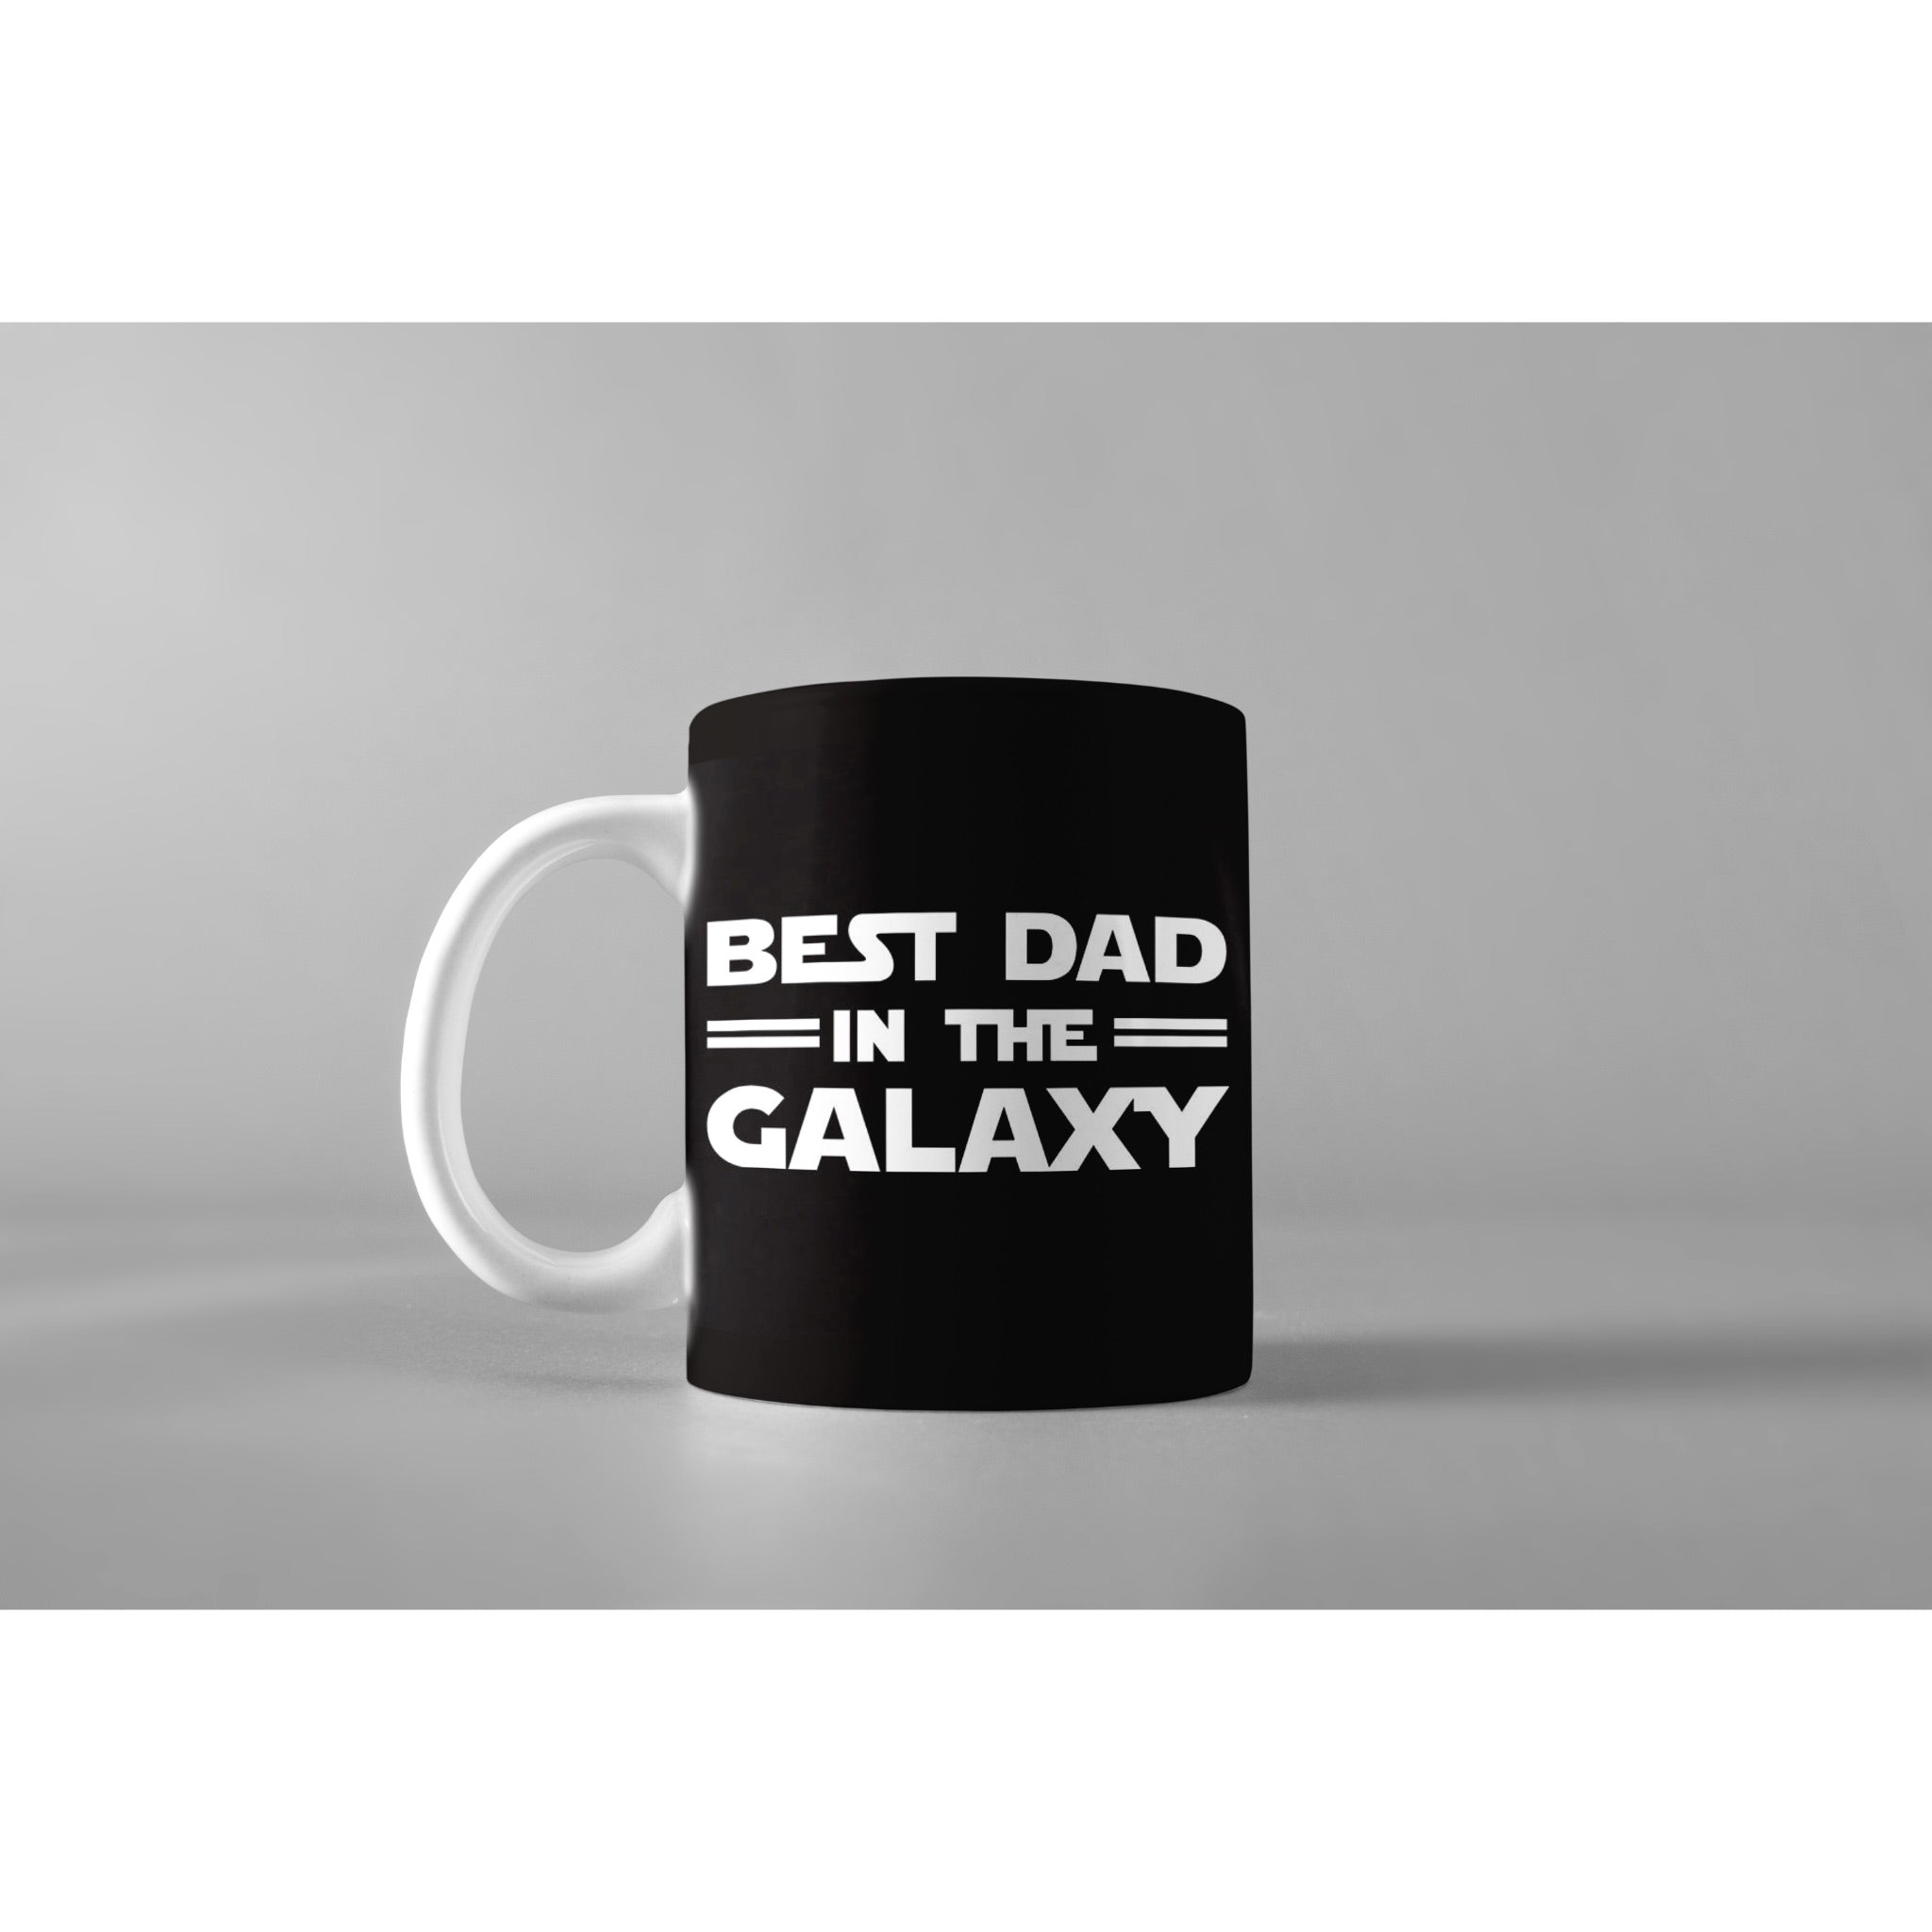 Best Dad in Galaxy-- Mugs for Father